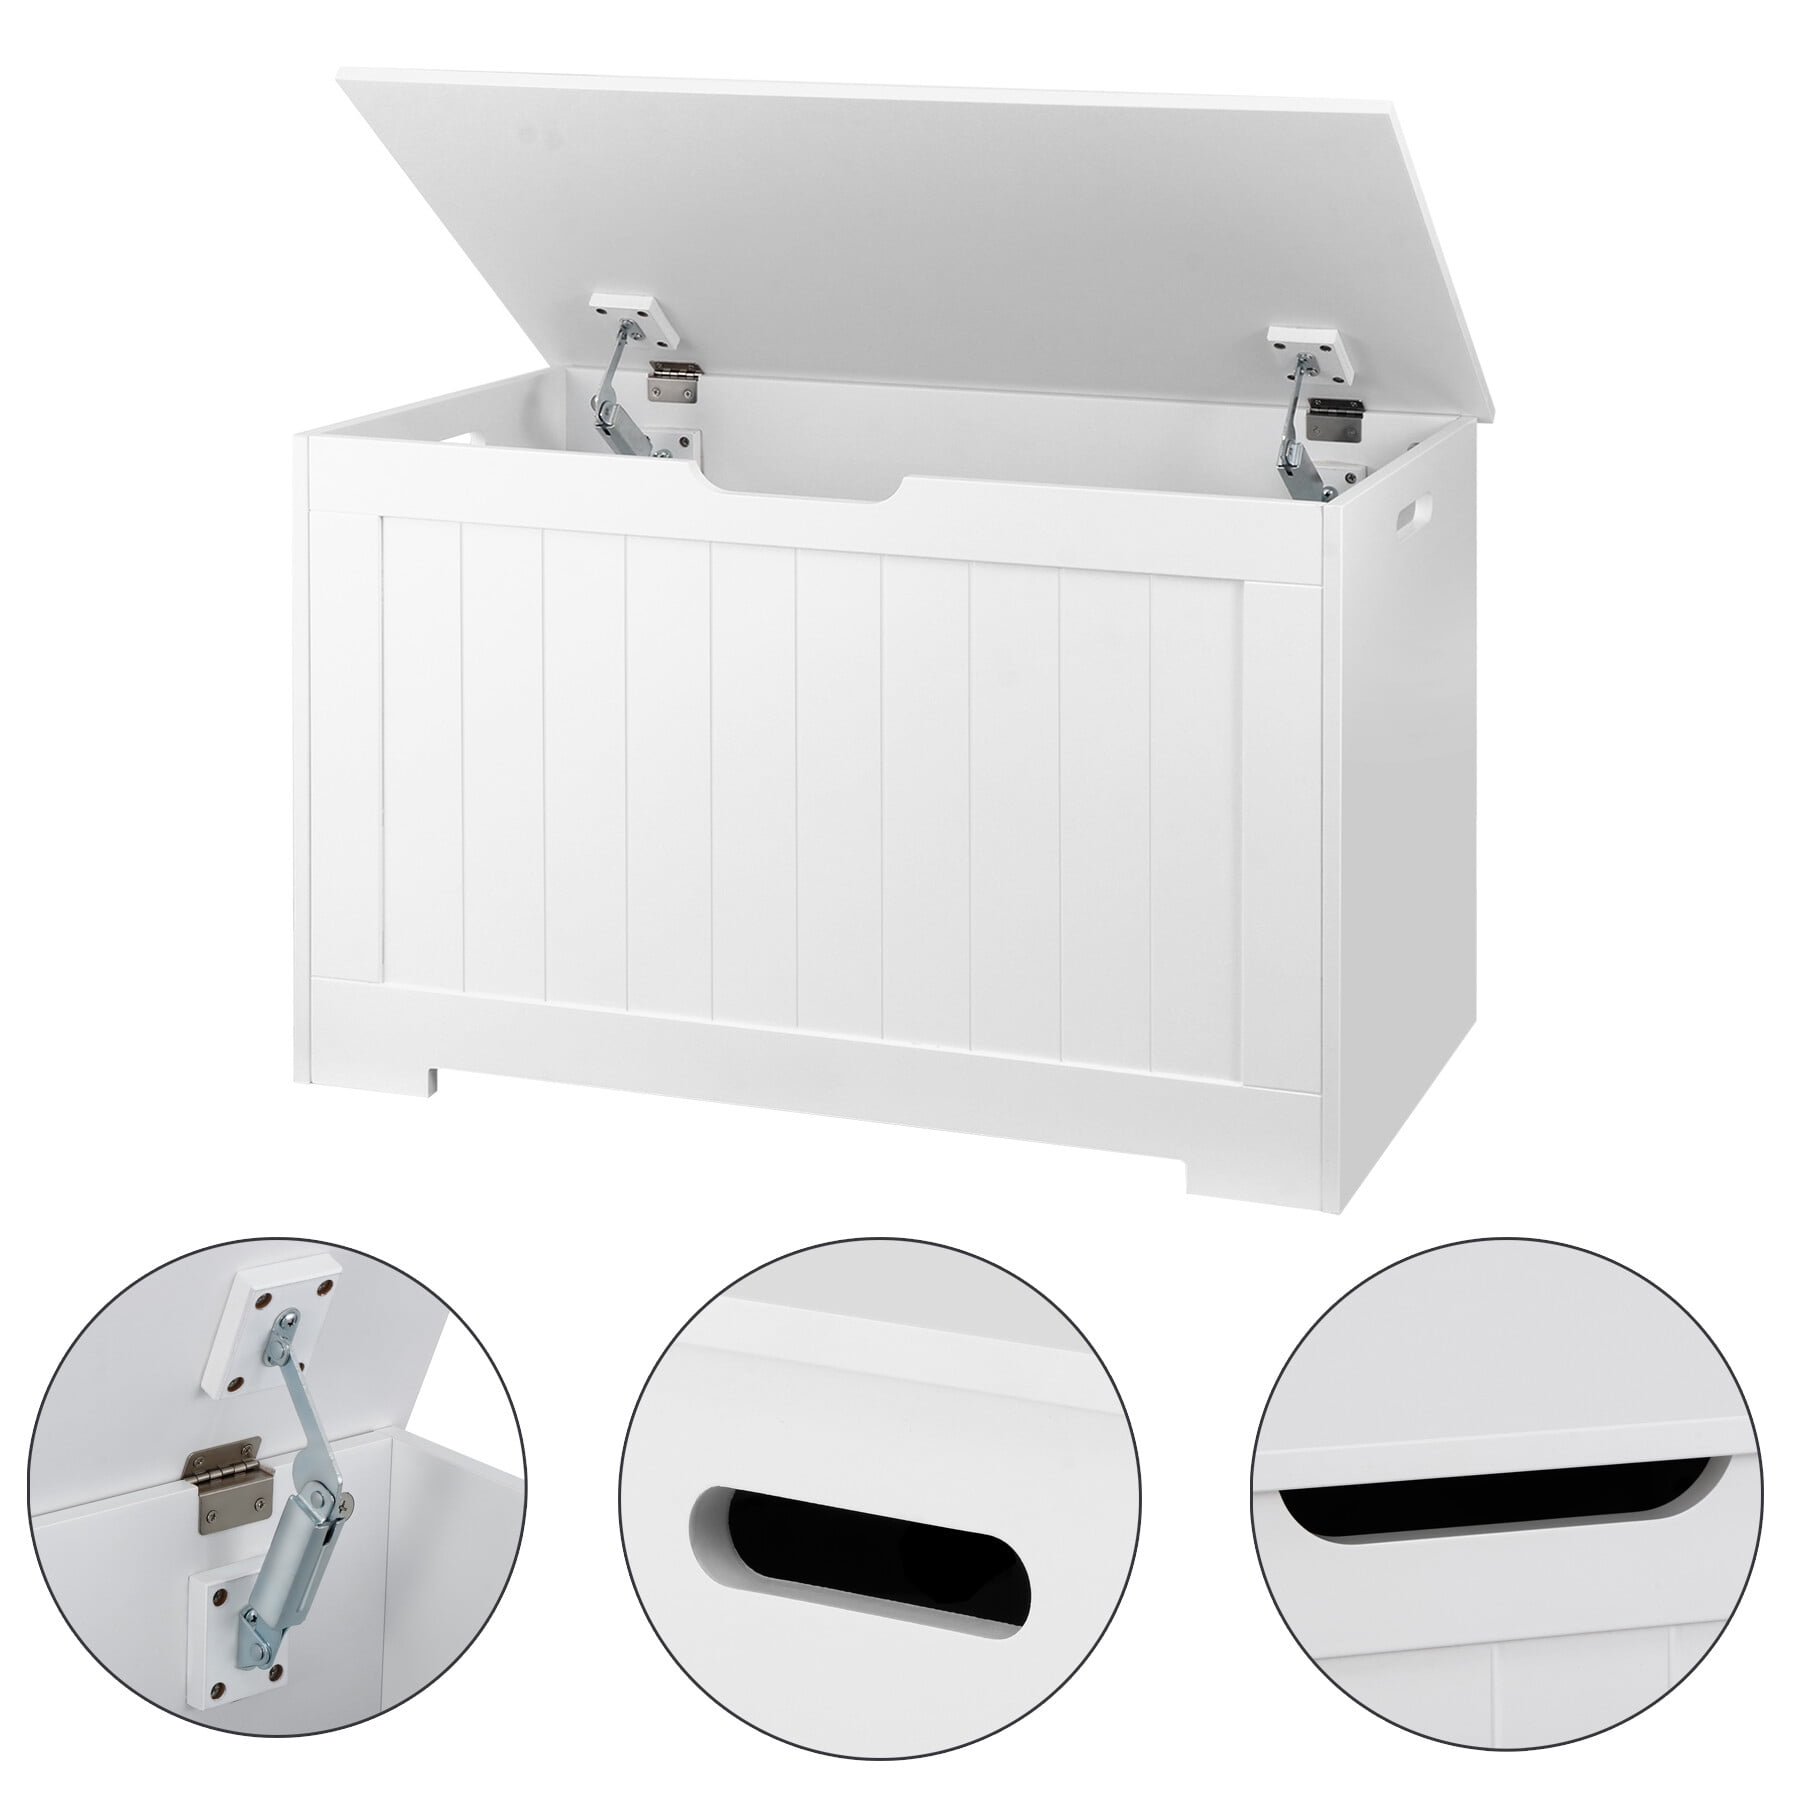 Yofe White Wooden Storage Organizing Kids Toy Box/Bench/Chest with Safety Hinged Lid for Ages 3+ Children